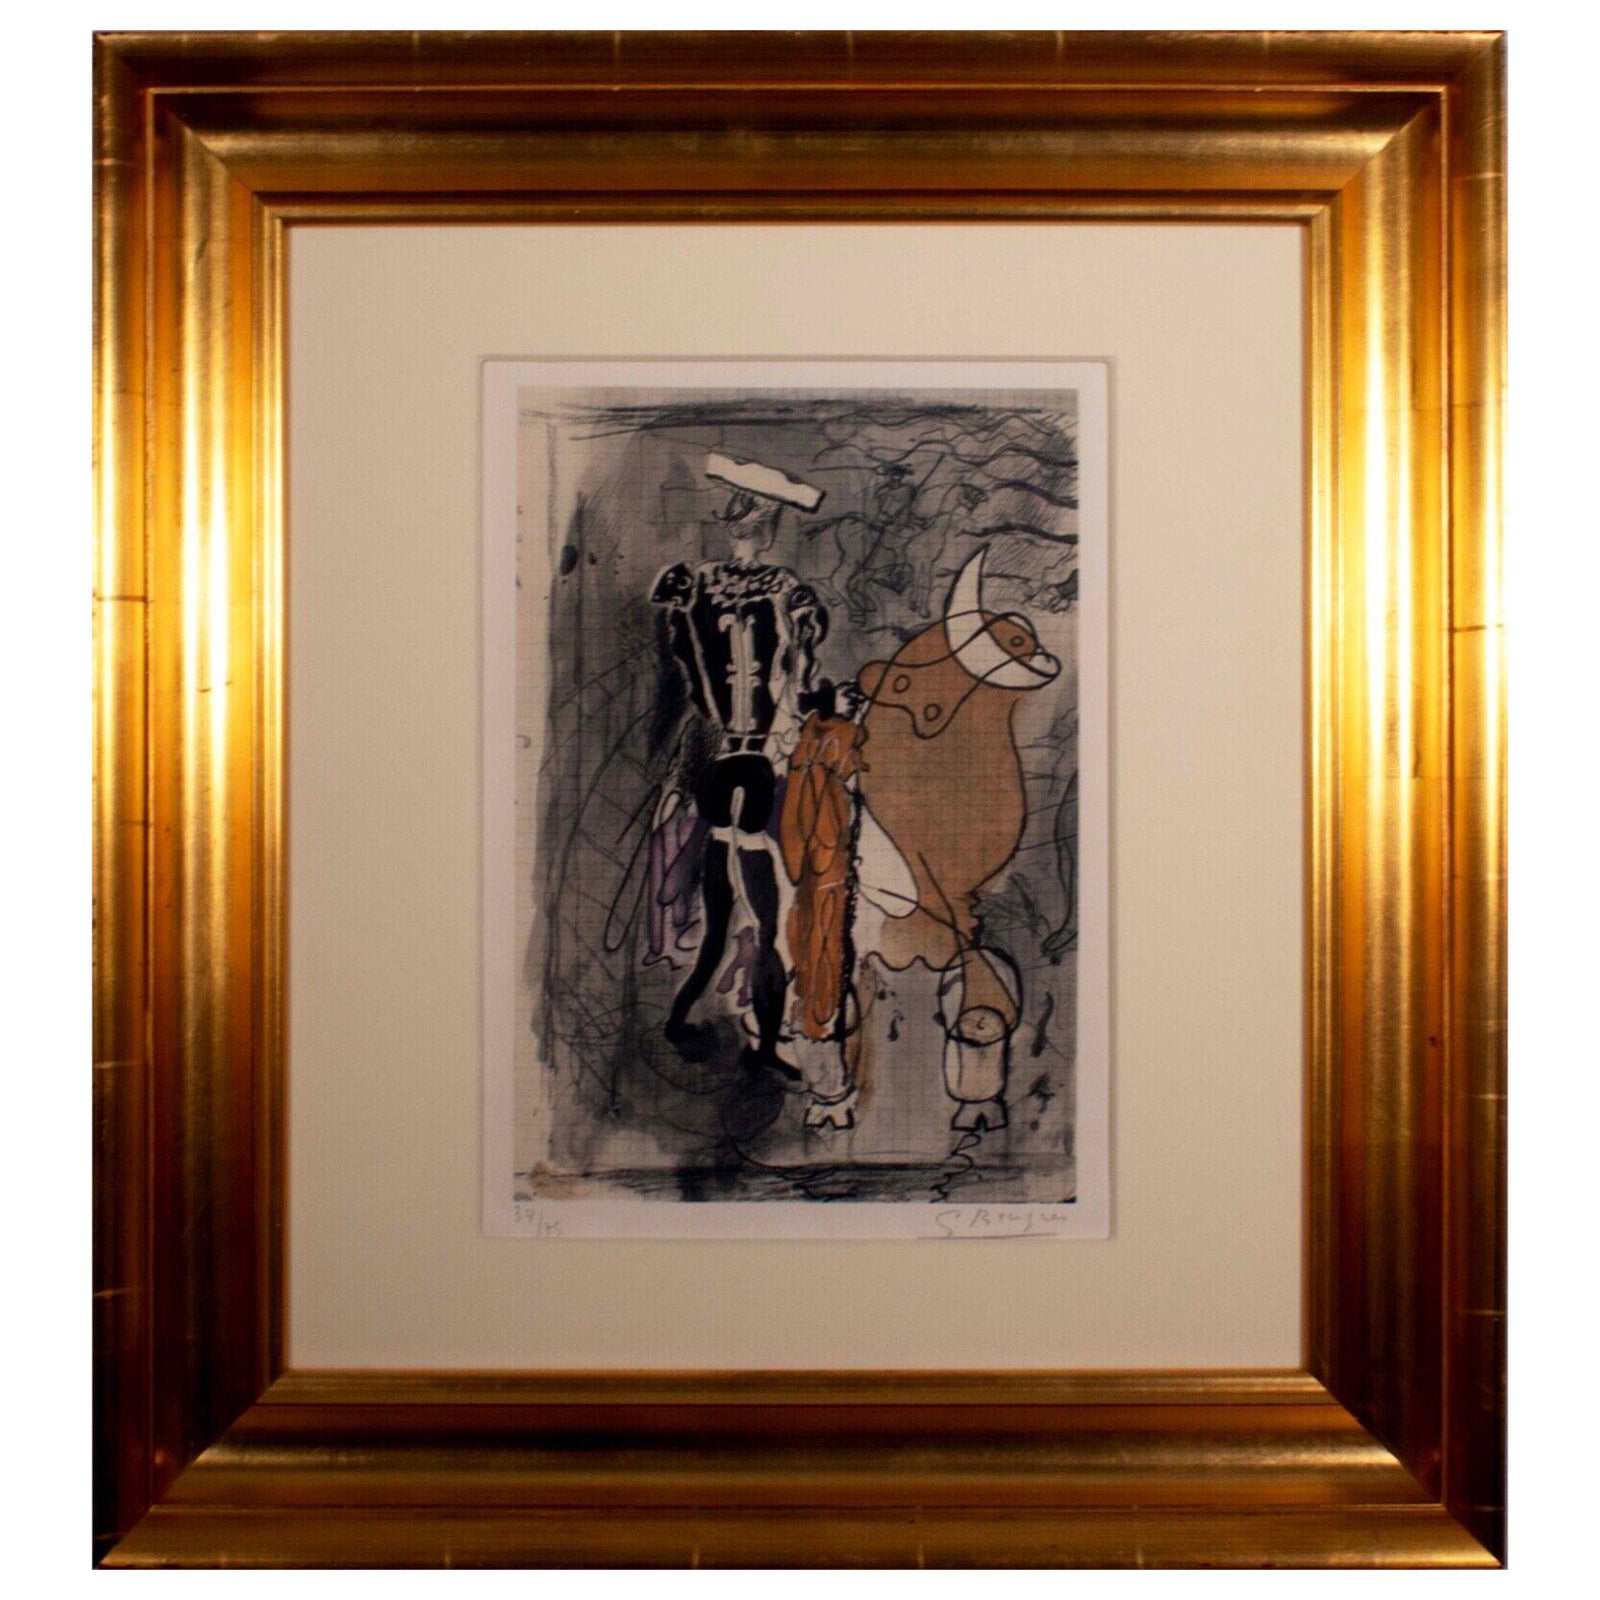 Georges Braque Untitled Torero Signed Lithograph on Paper 34/75 Framed 1950s